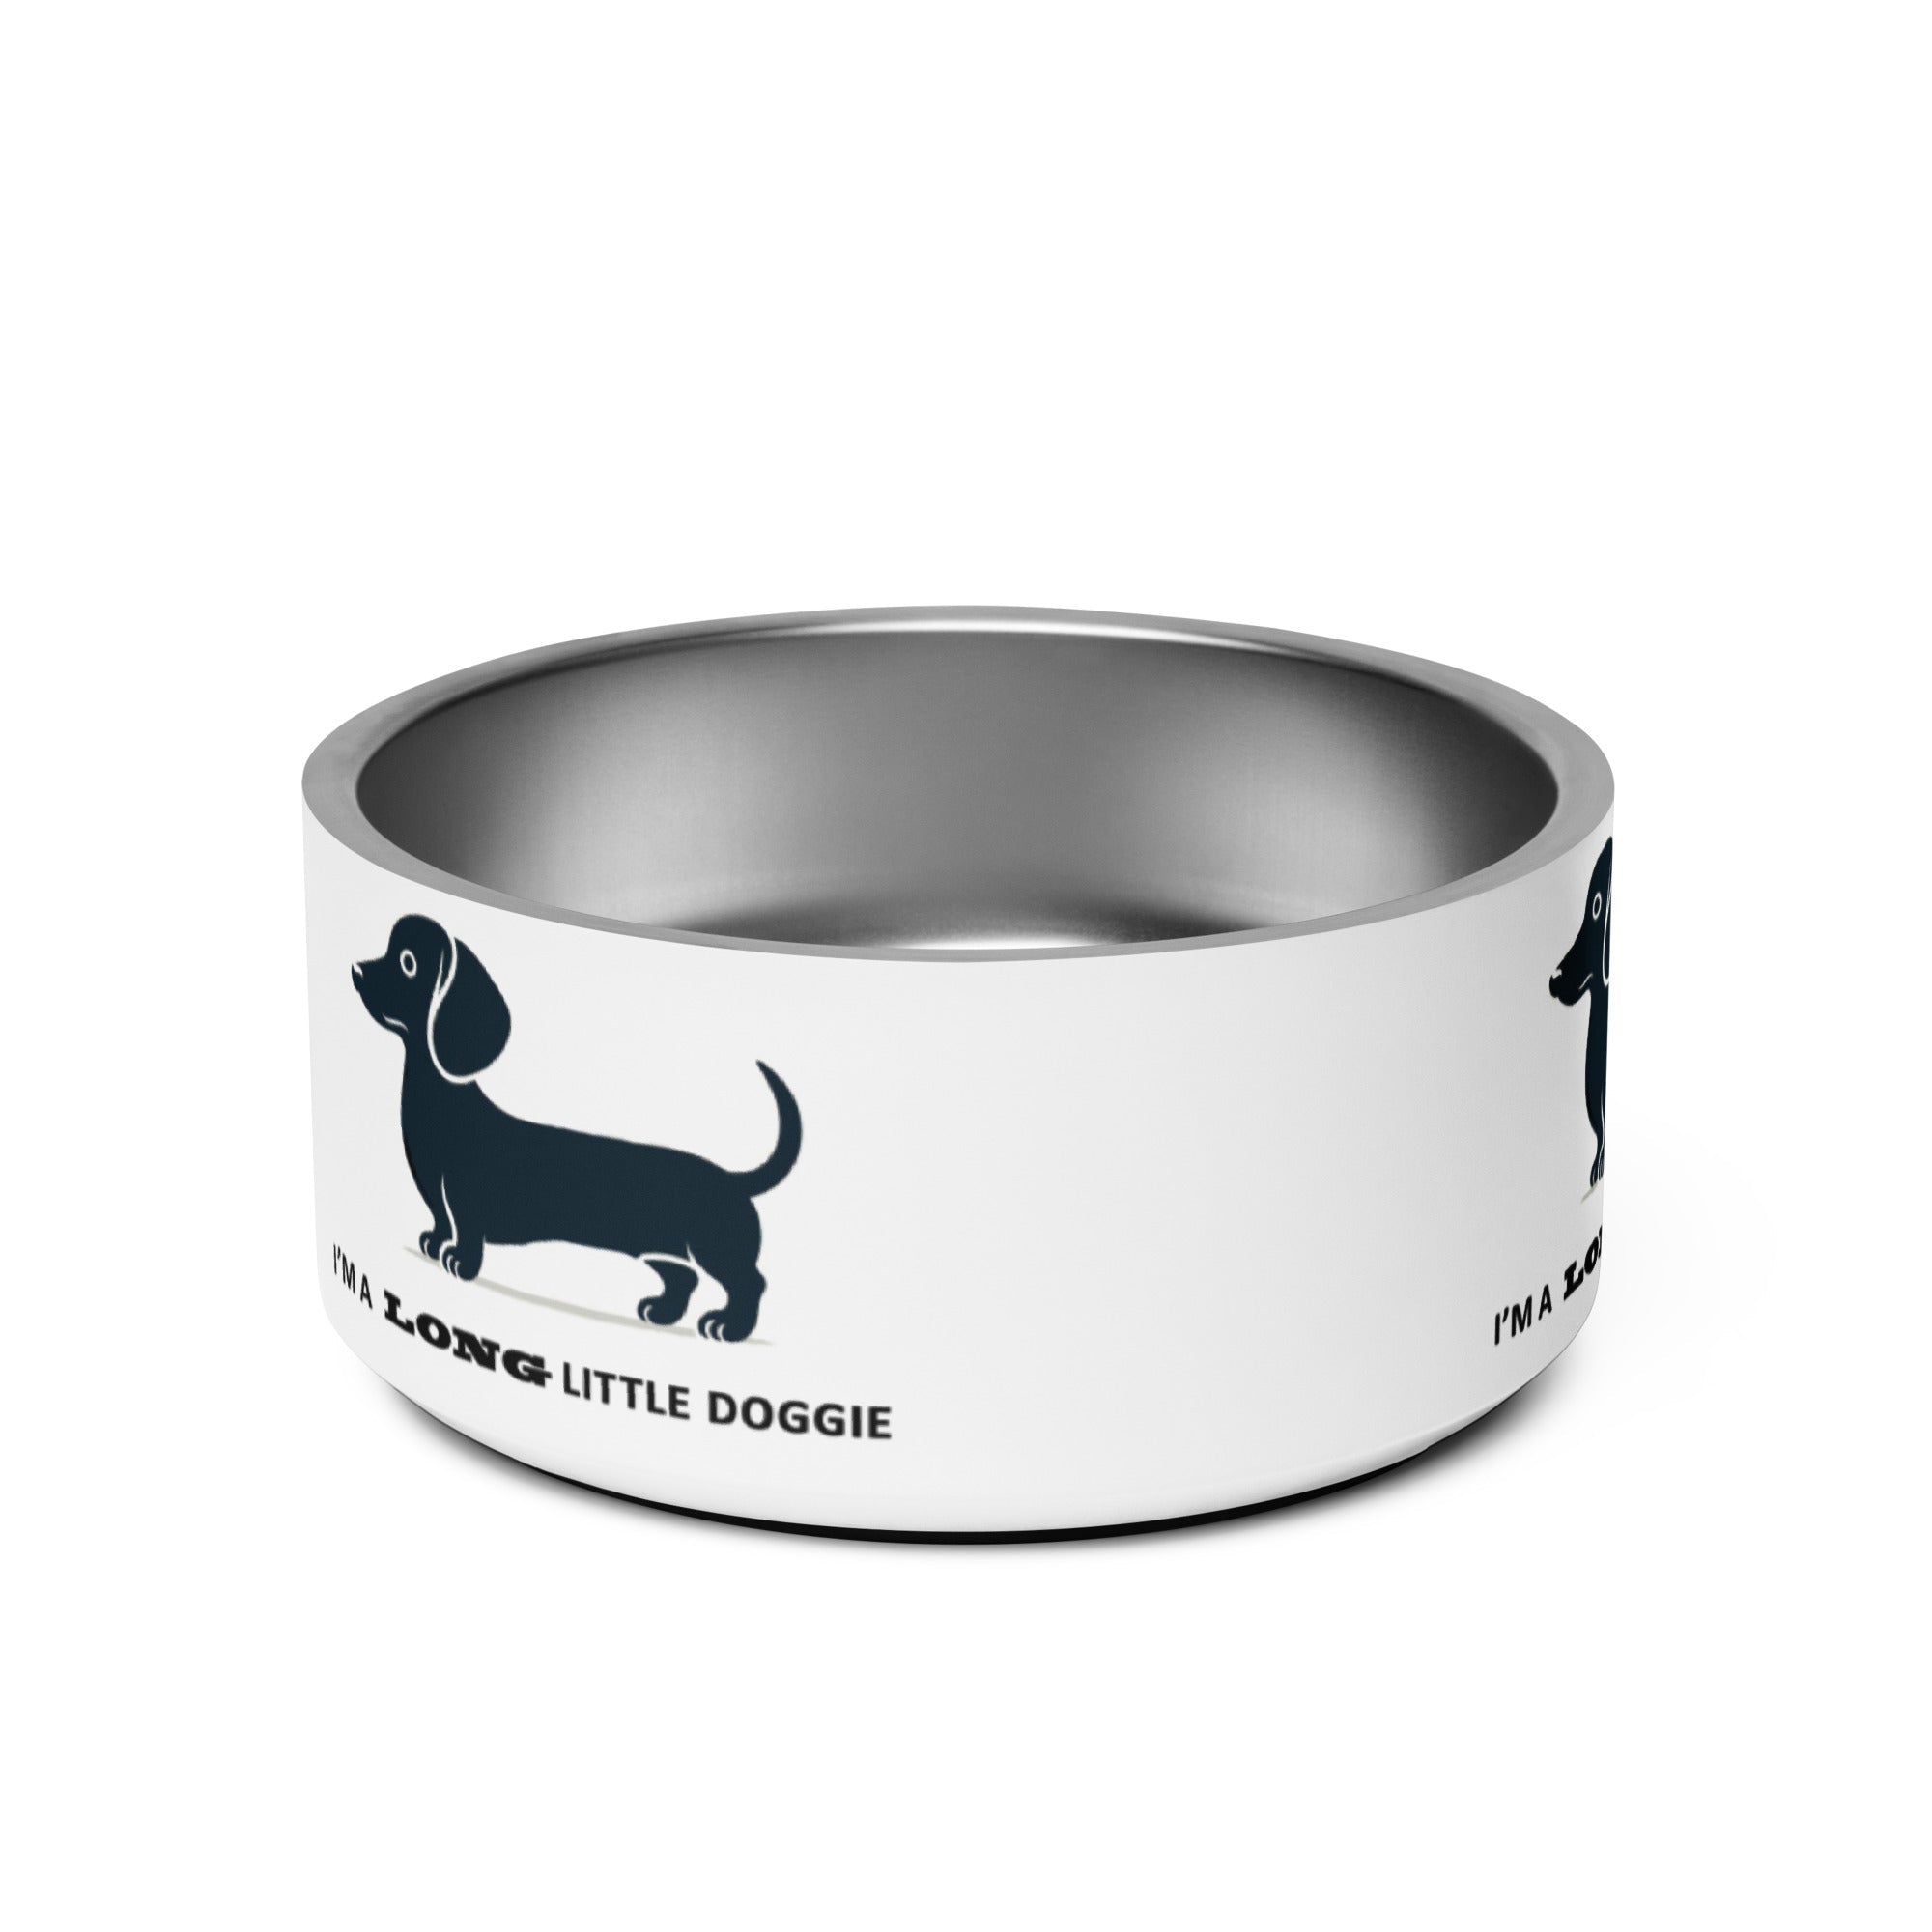 32 Oz Stainless Steel Pet Bowl with Cute Dachshund Design Online